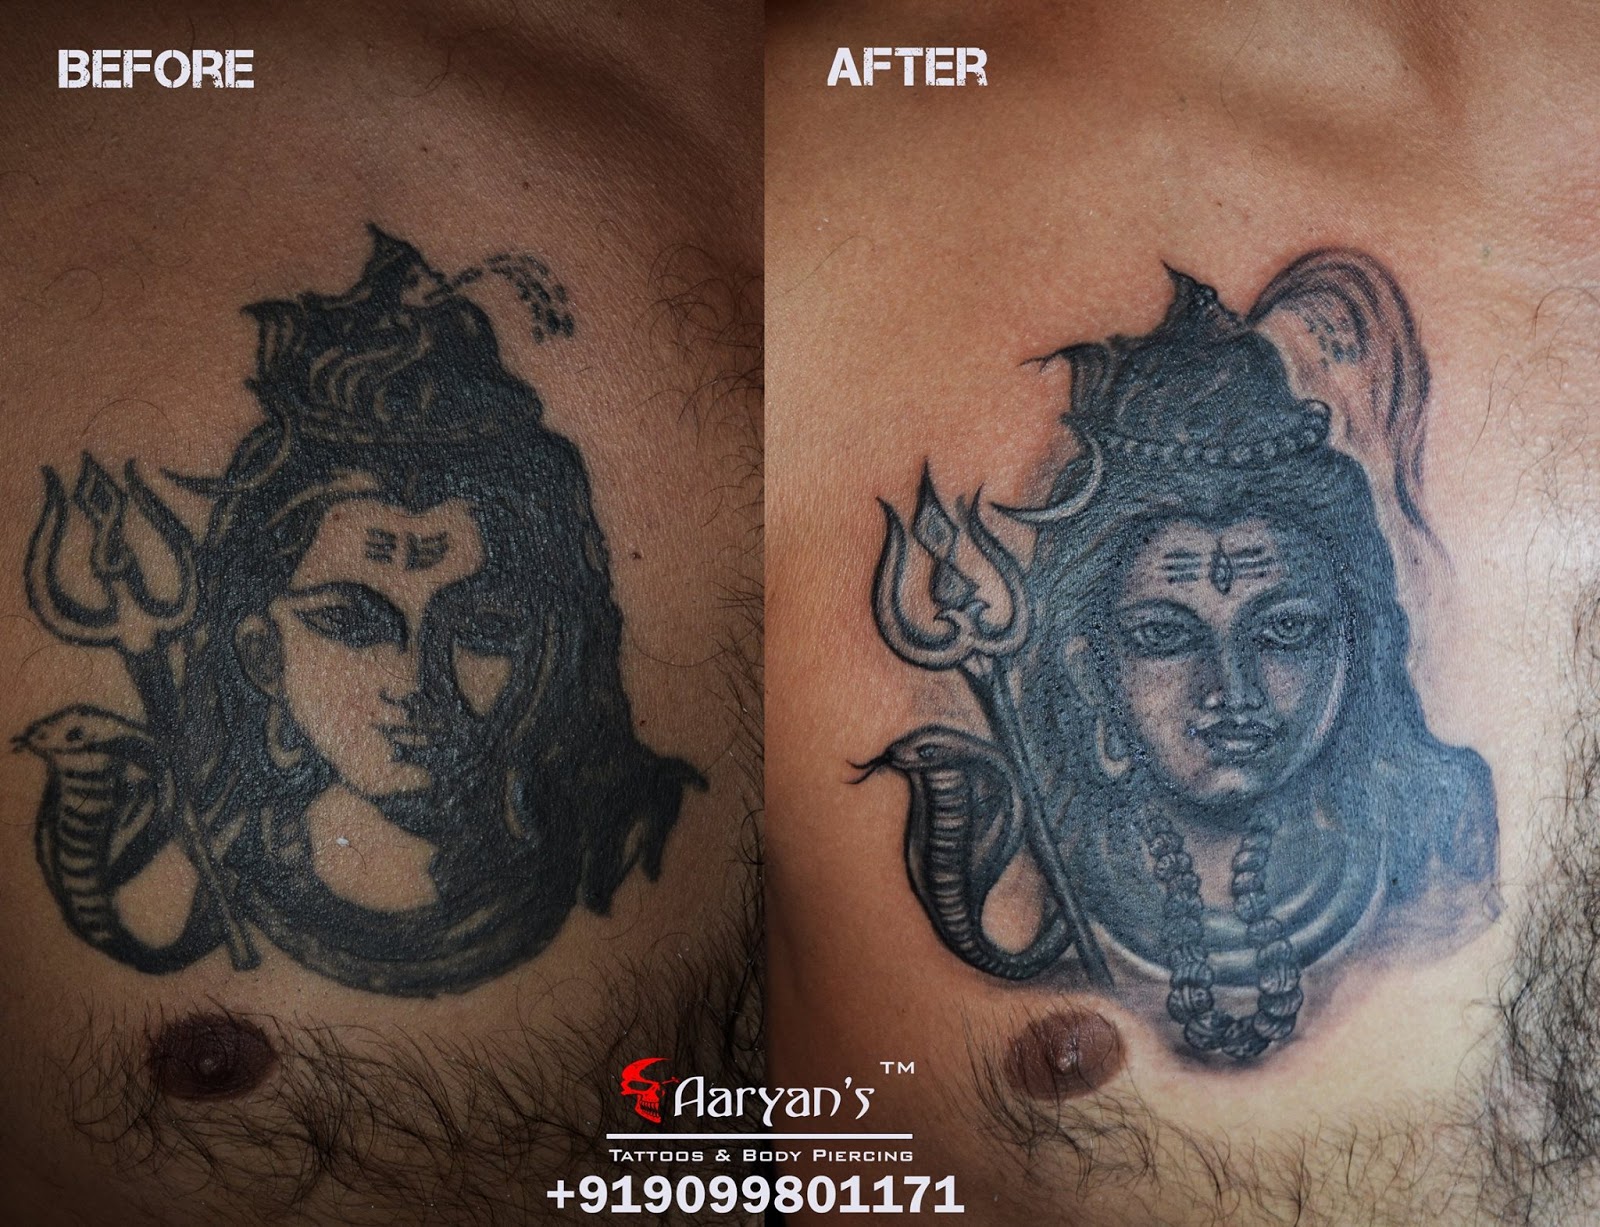 Best Before After Tattoo By Aaryans Tattoos In Ahmedabad : Best Before